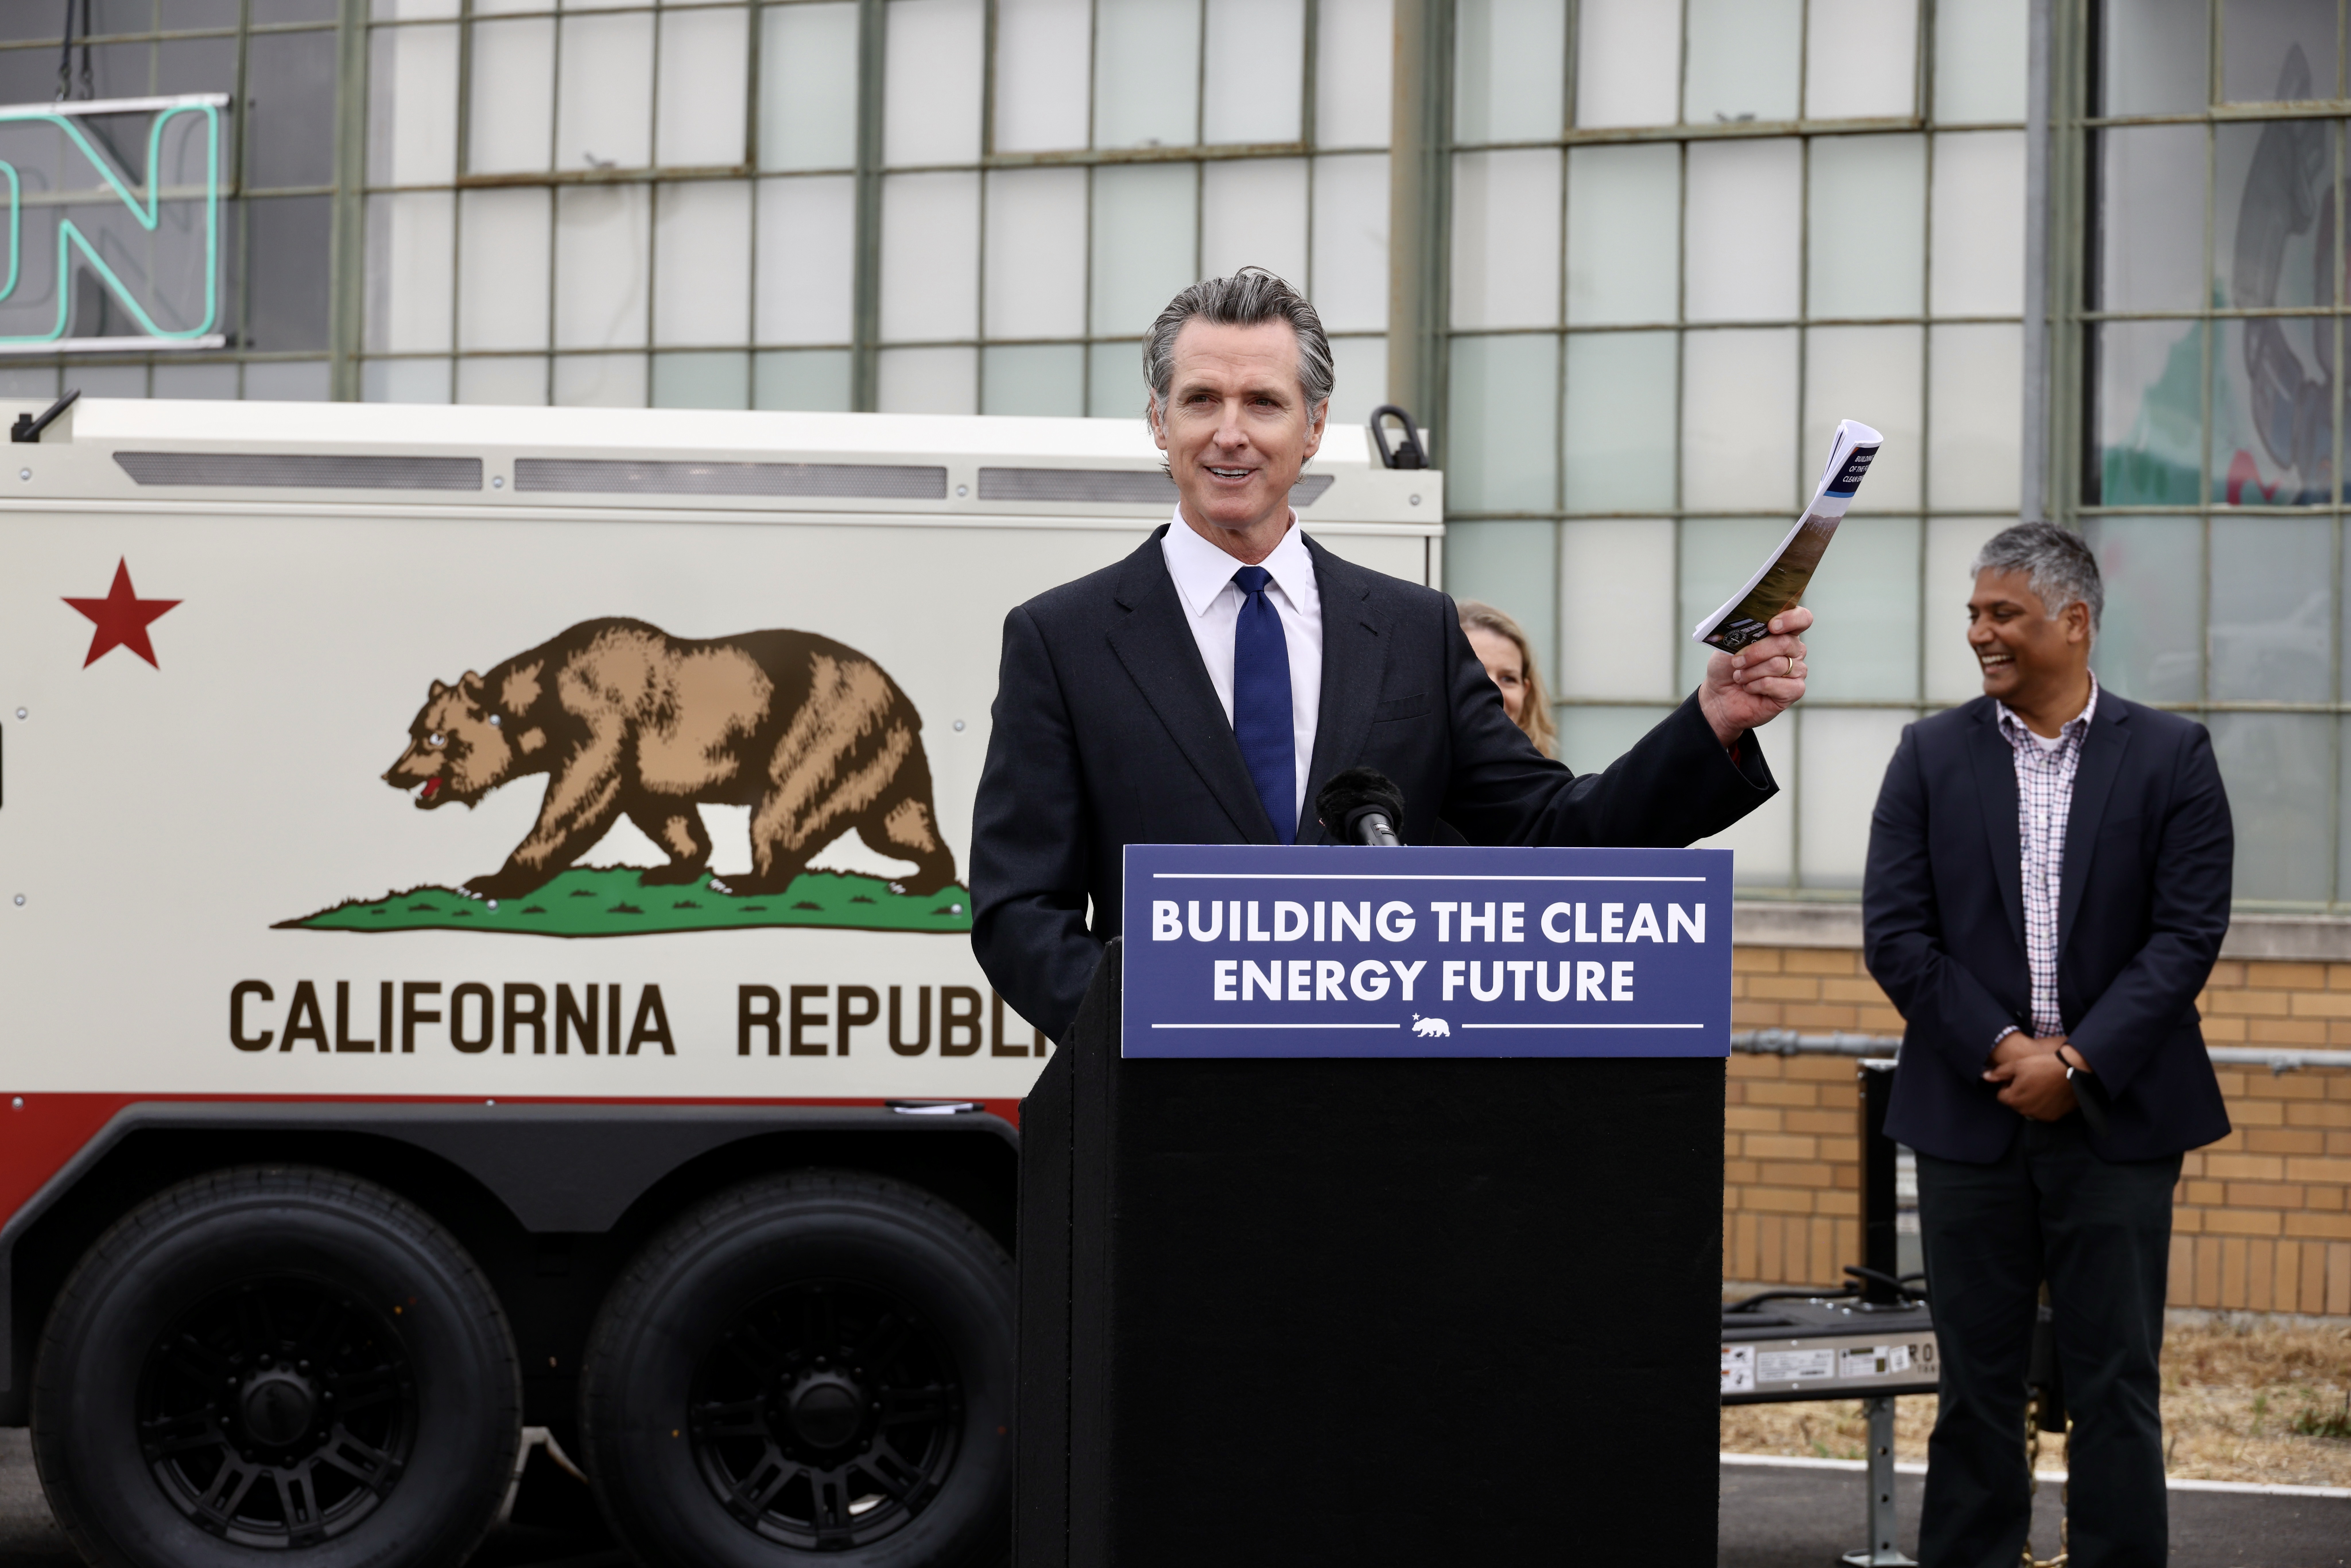 Governor Newsom Updates the Roadmap to California’s Clean Energy Future